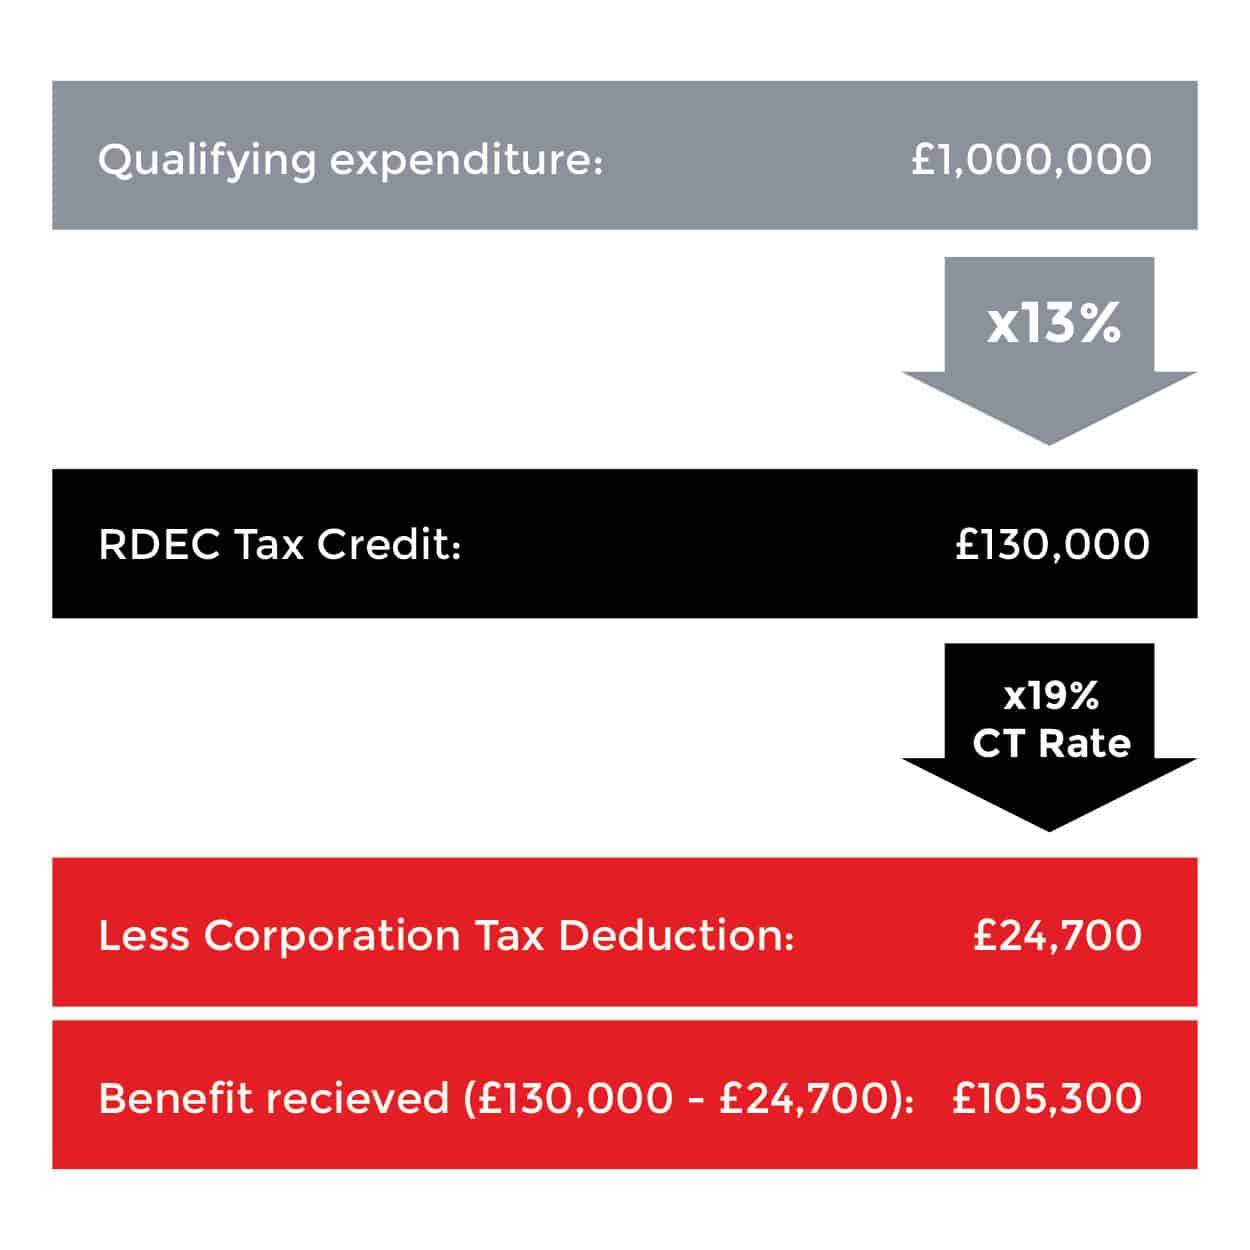 How Does the Benefit Work for the RDEC Scheme?